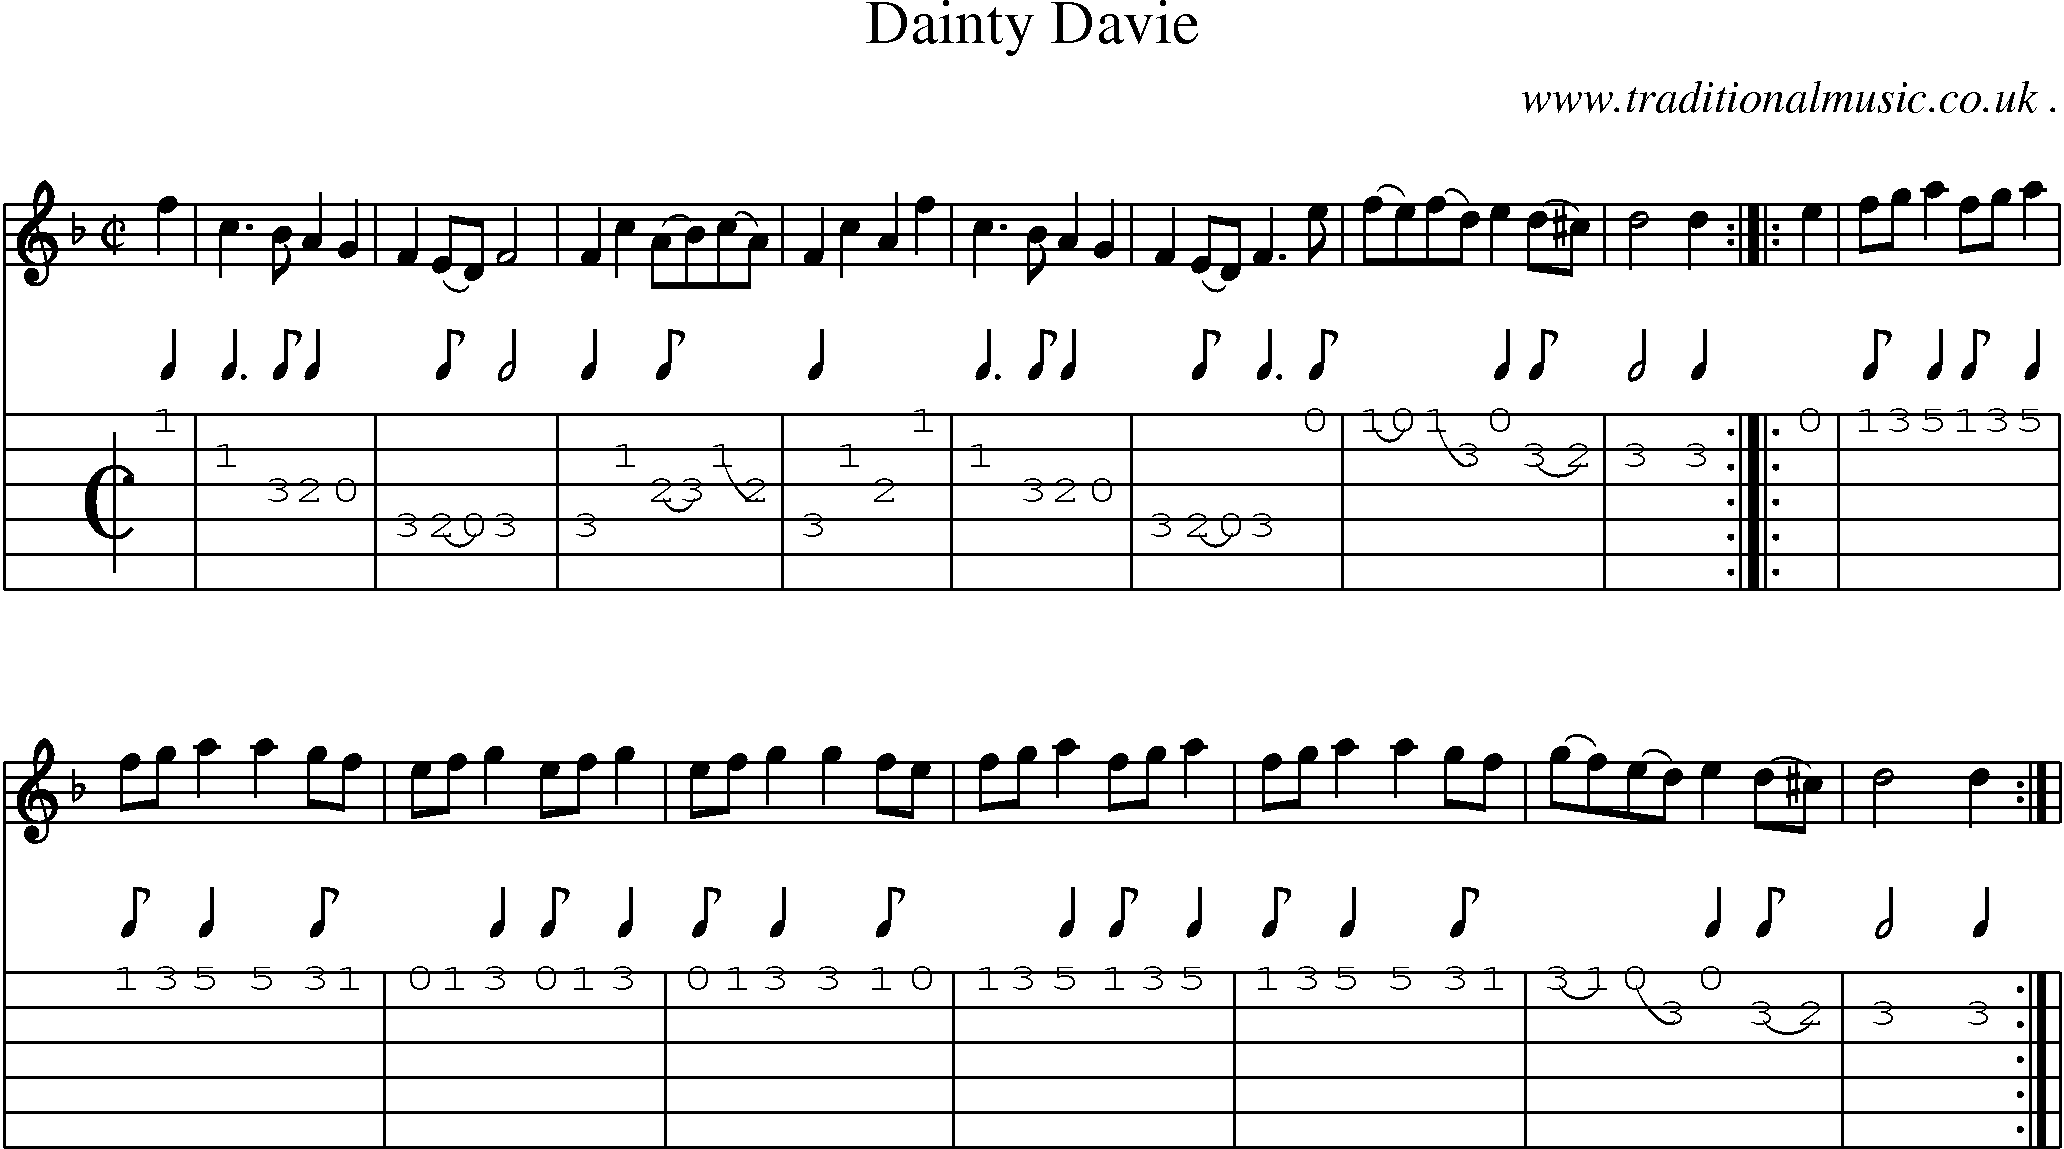 Sheet-Music and Guitar Tabs for Dainty Davie